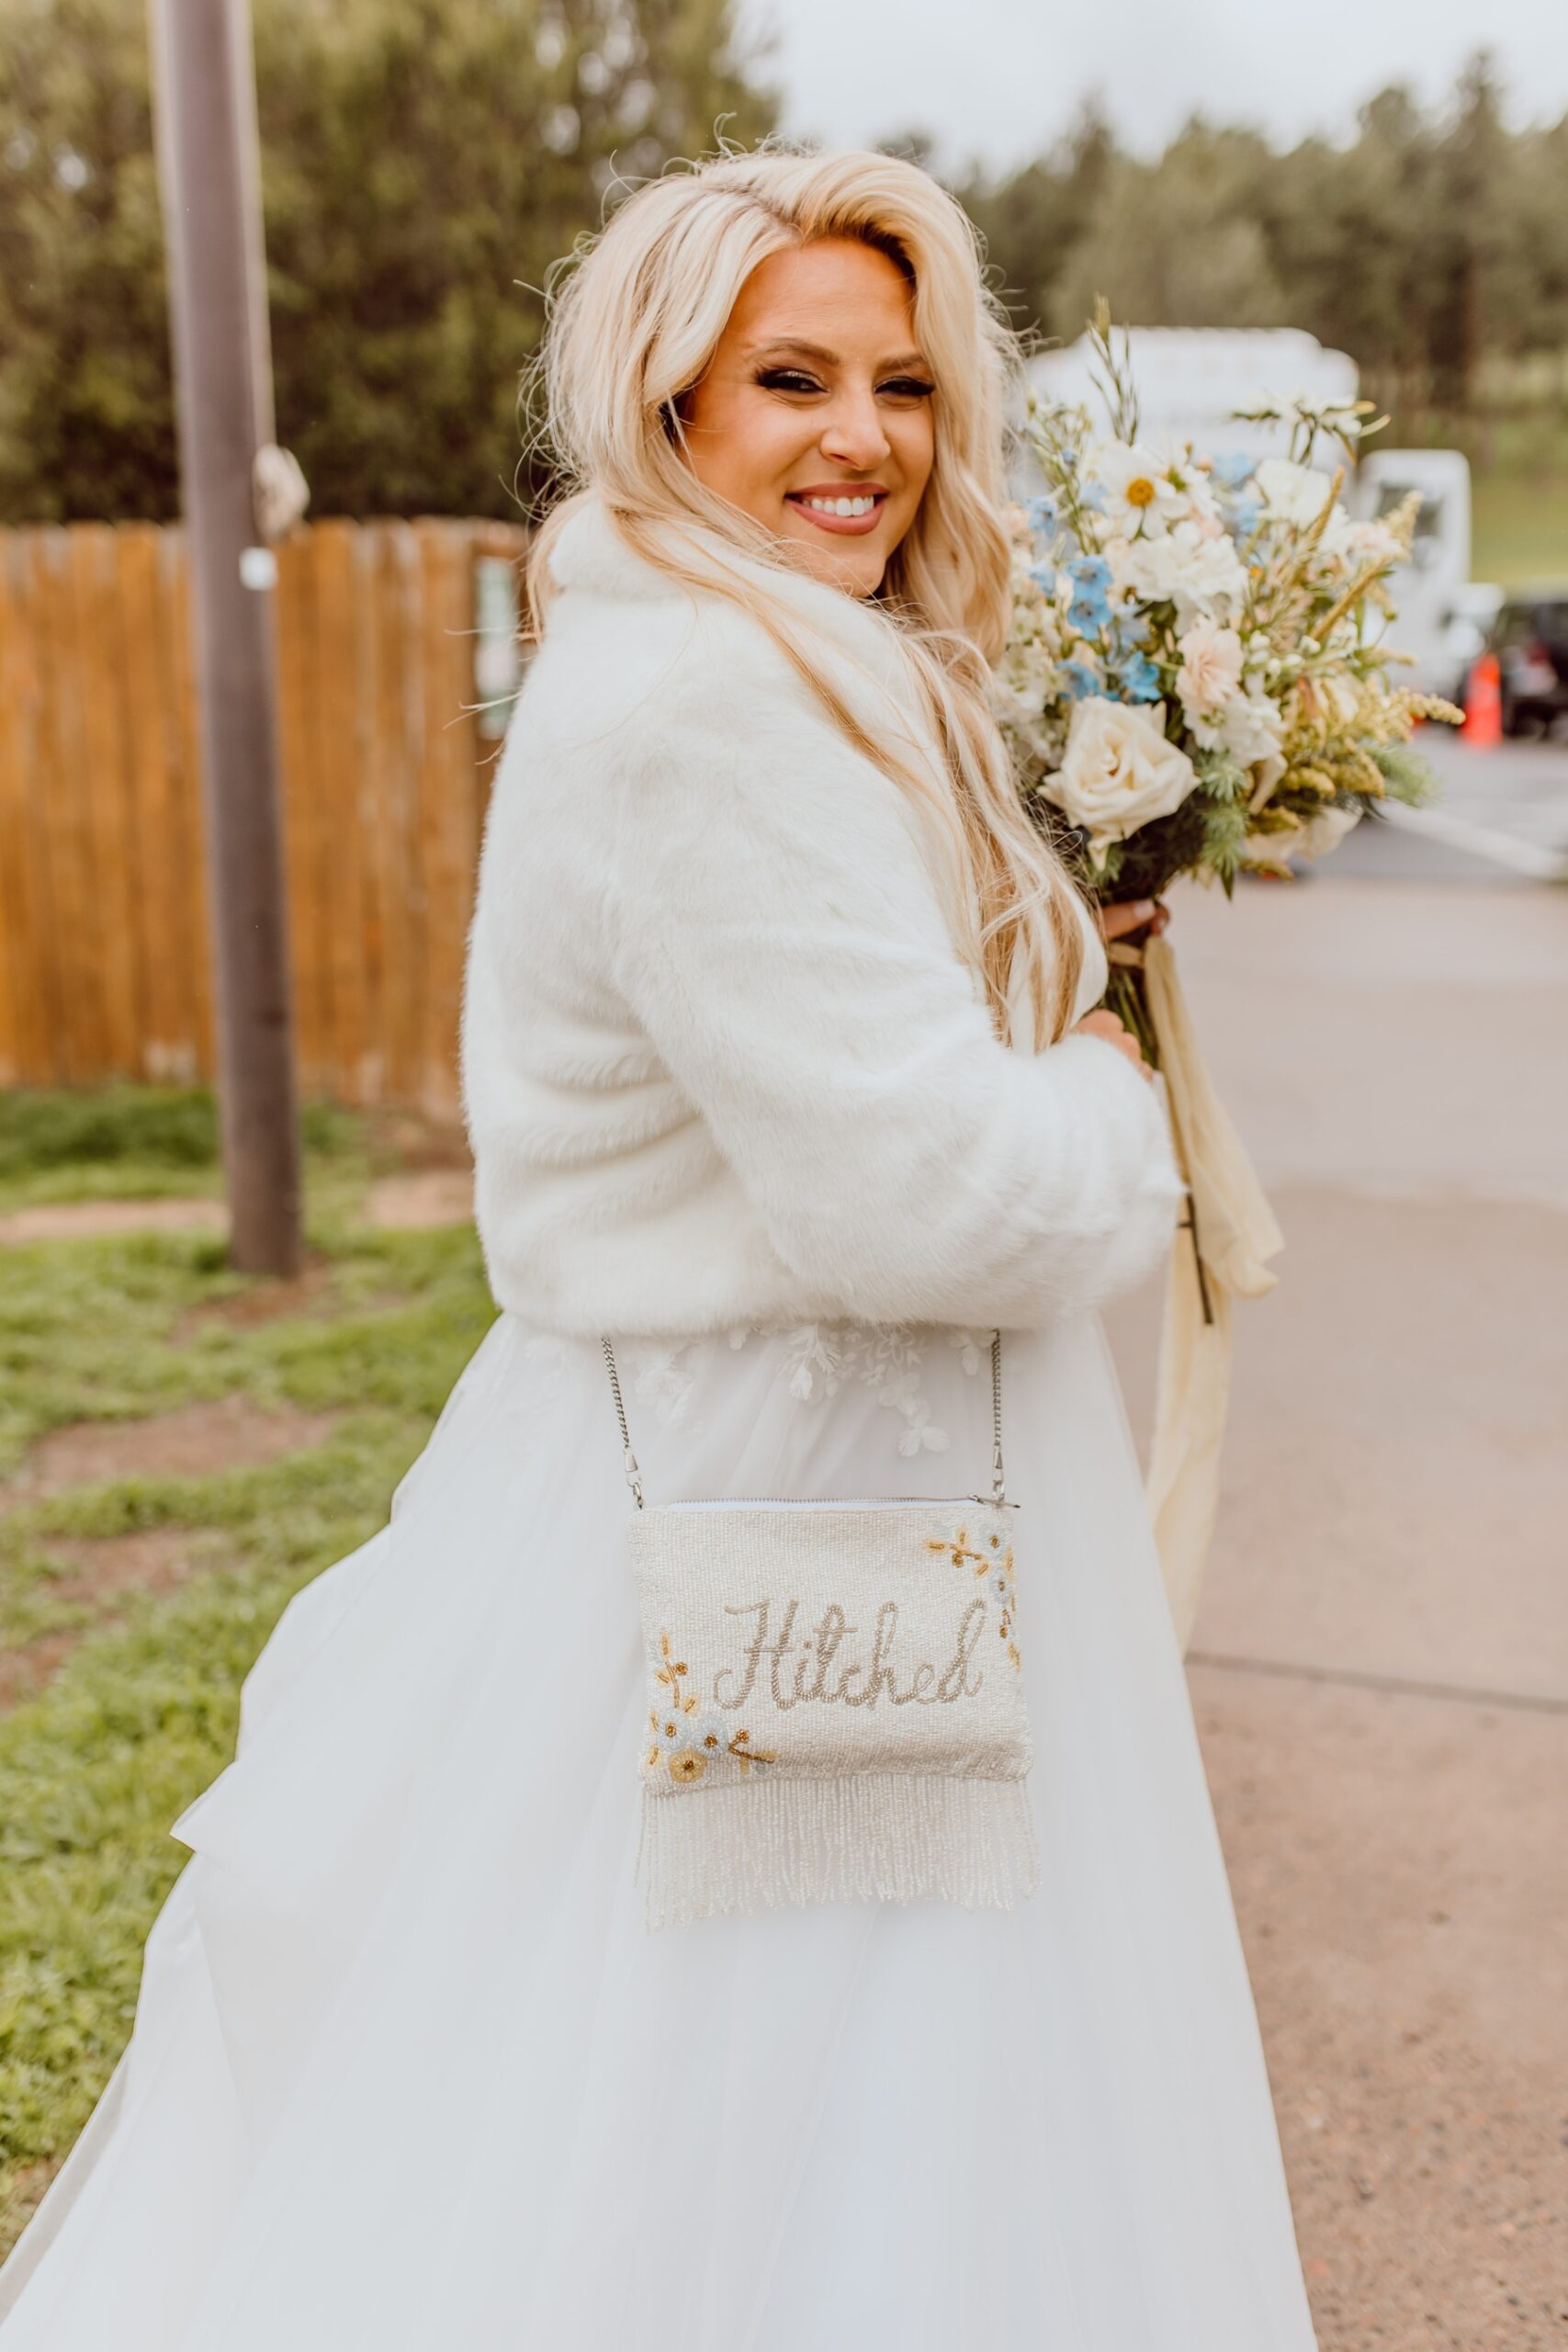 Bride wearing fur jacket with hitched crossbody purse